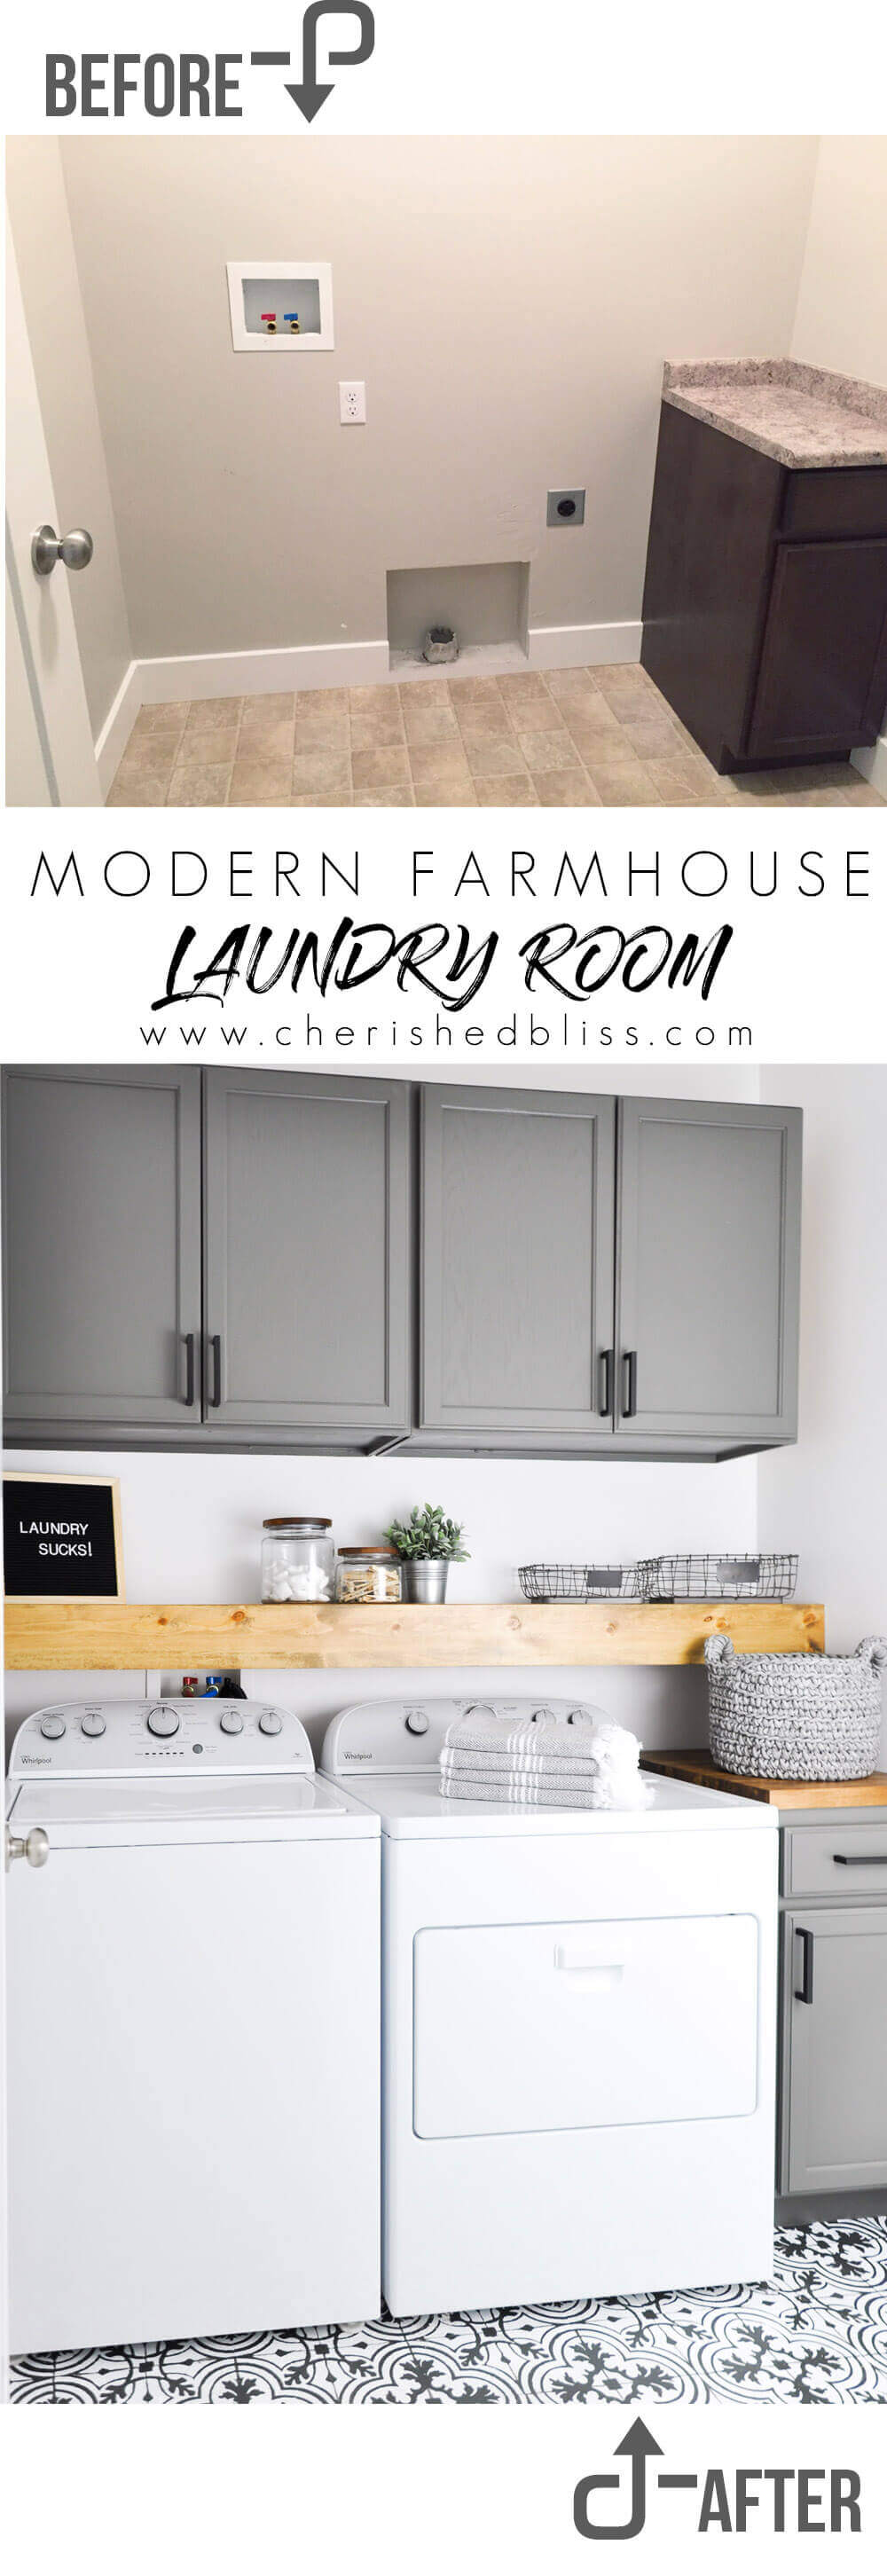 Farmhouse Laundry Room Weekend Project